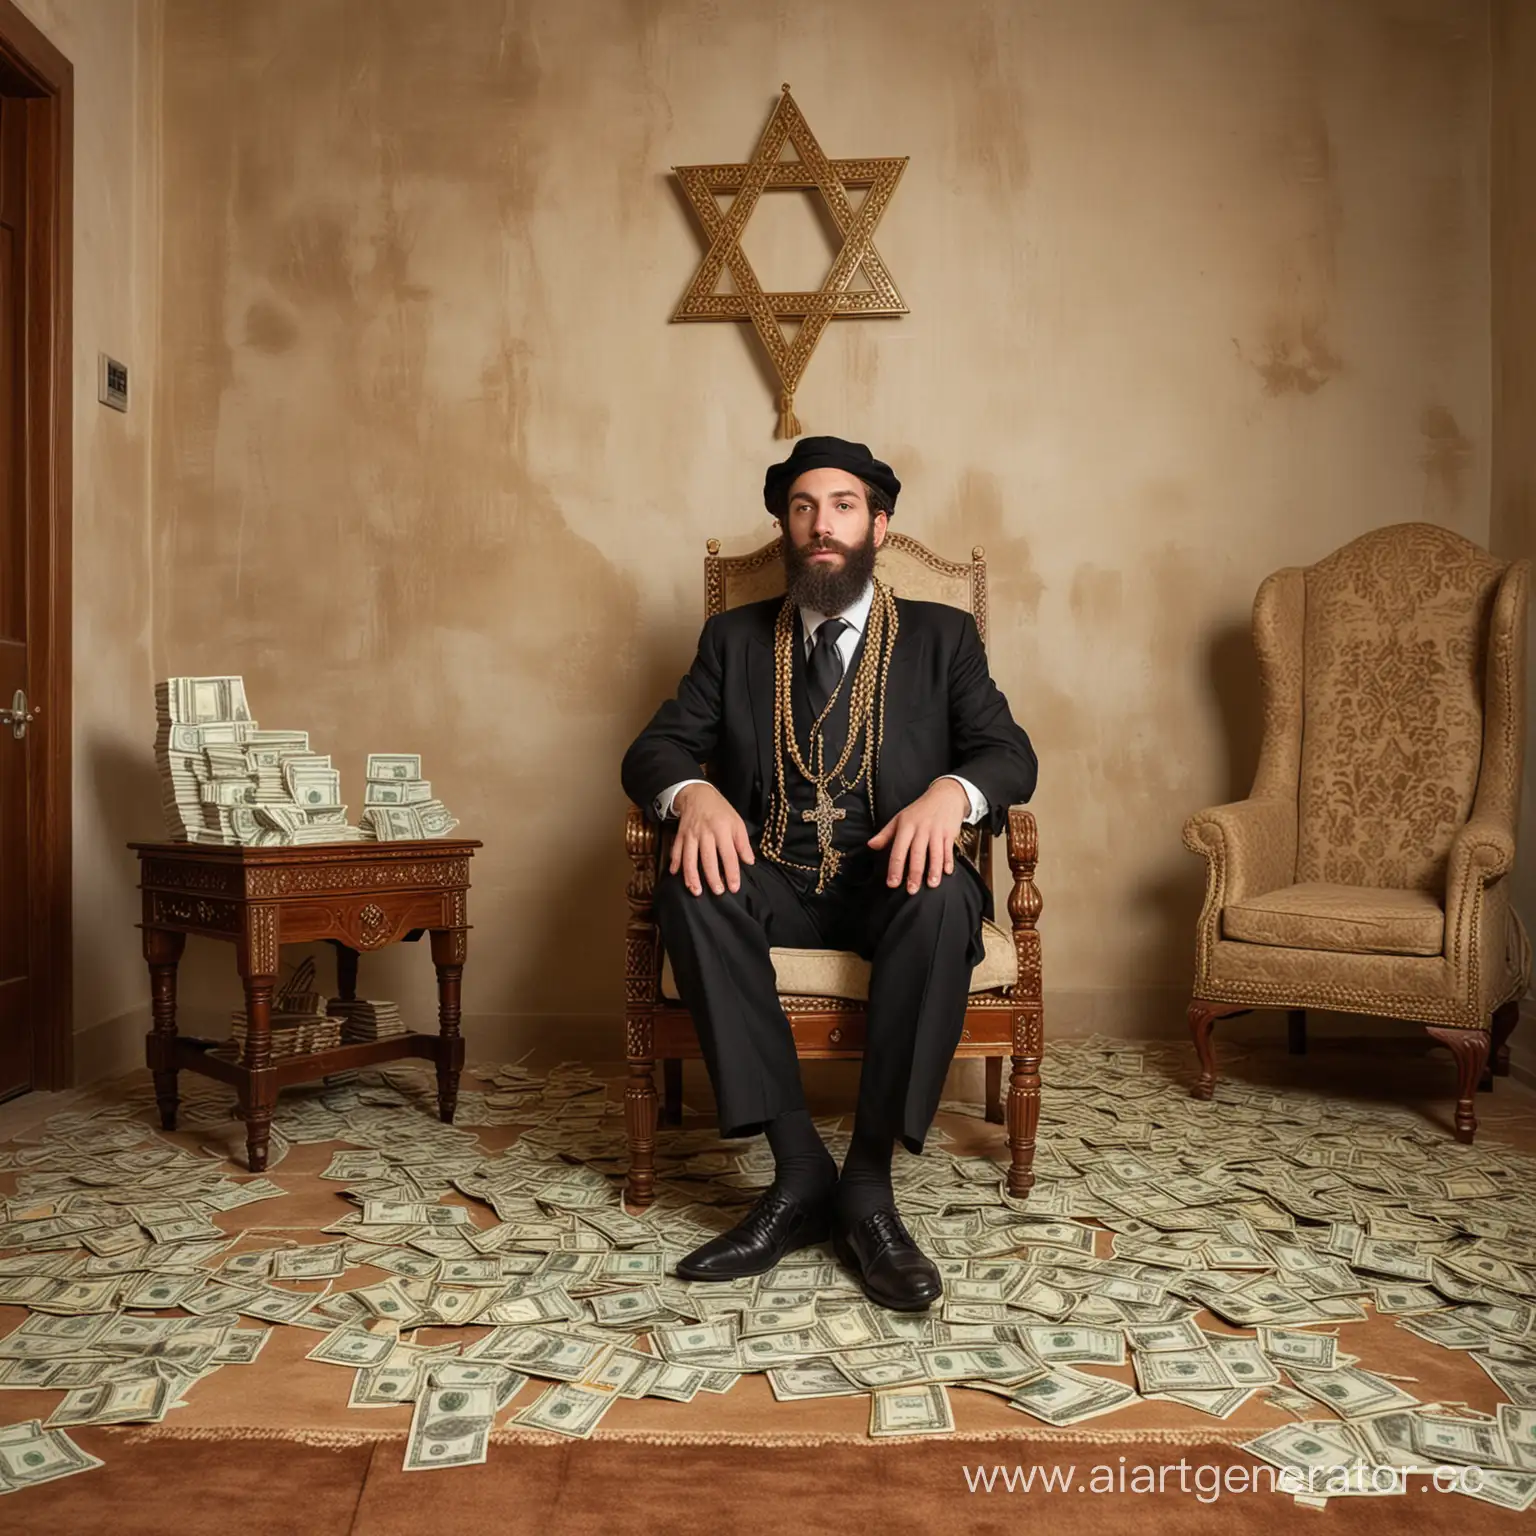 A Jew with David Star in rich clothing who lives very richly and sits in a room where there is a lot of money